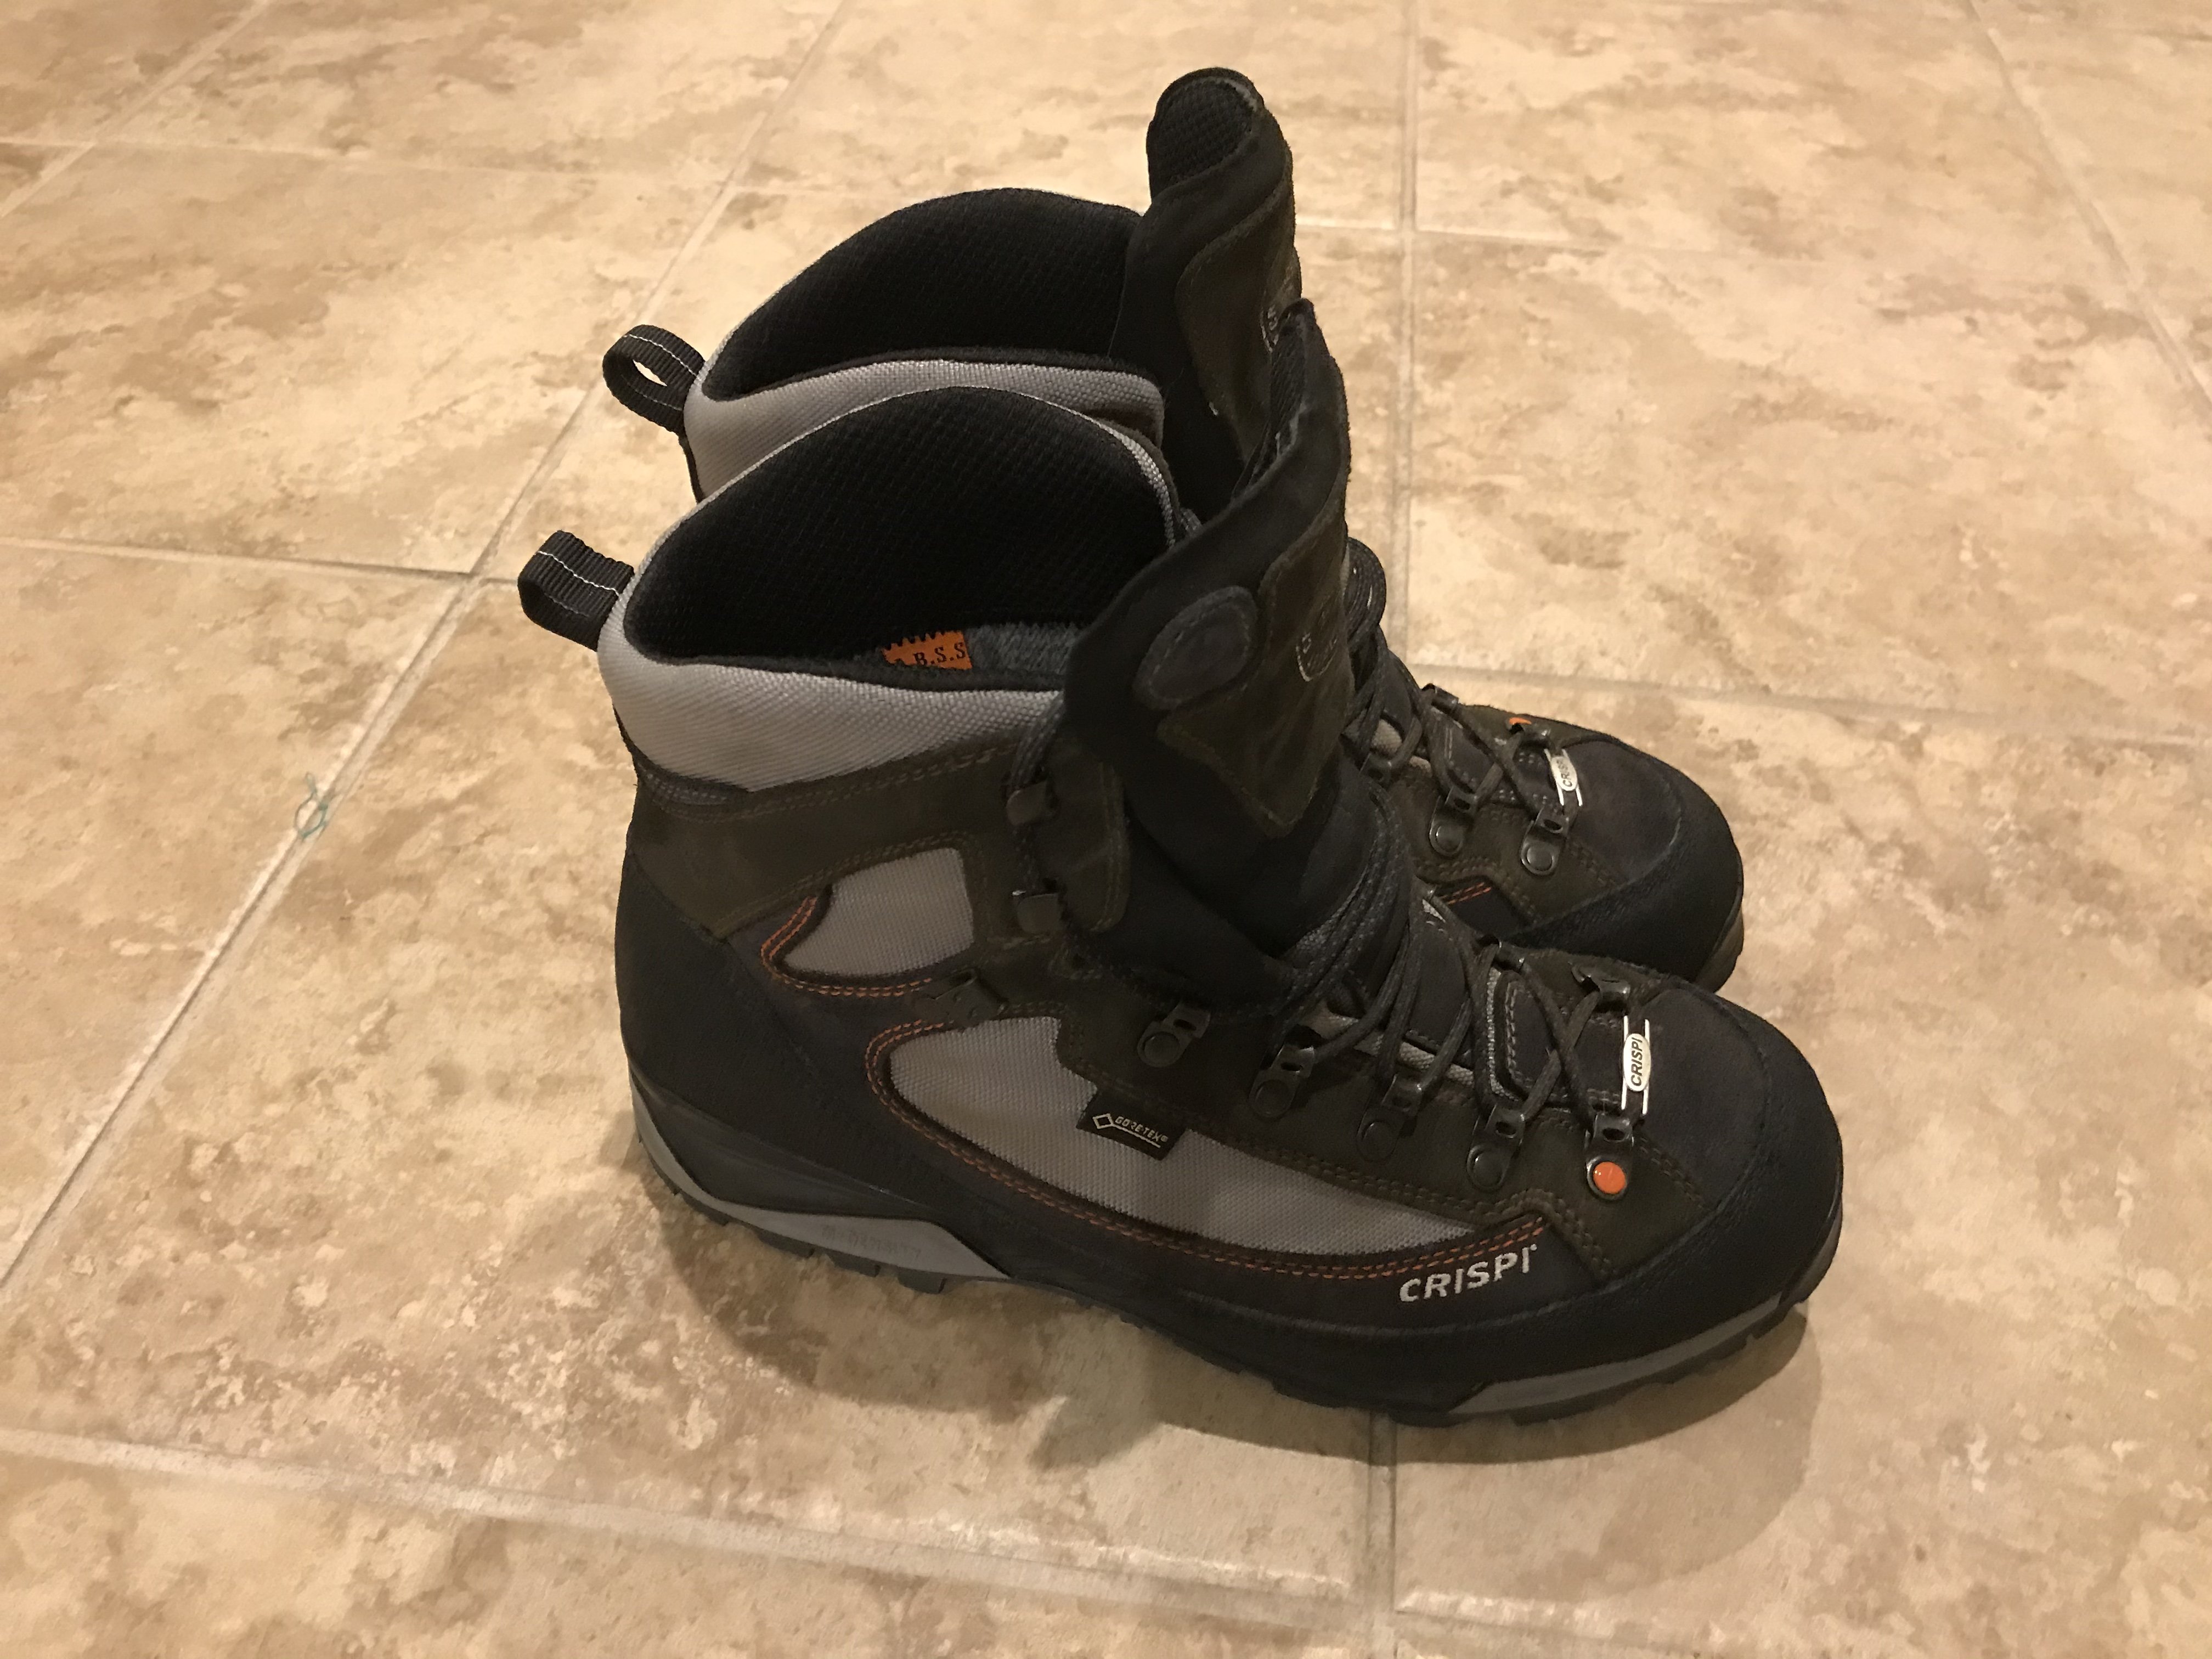 Crispi Colorado Boots size 9.5 - Classified Ads - CouesWhitetail.com ...